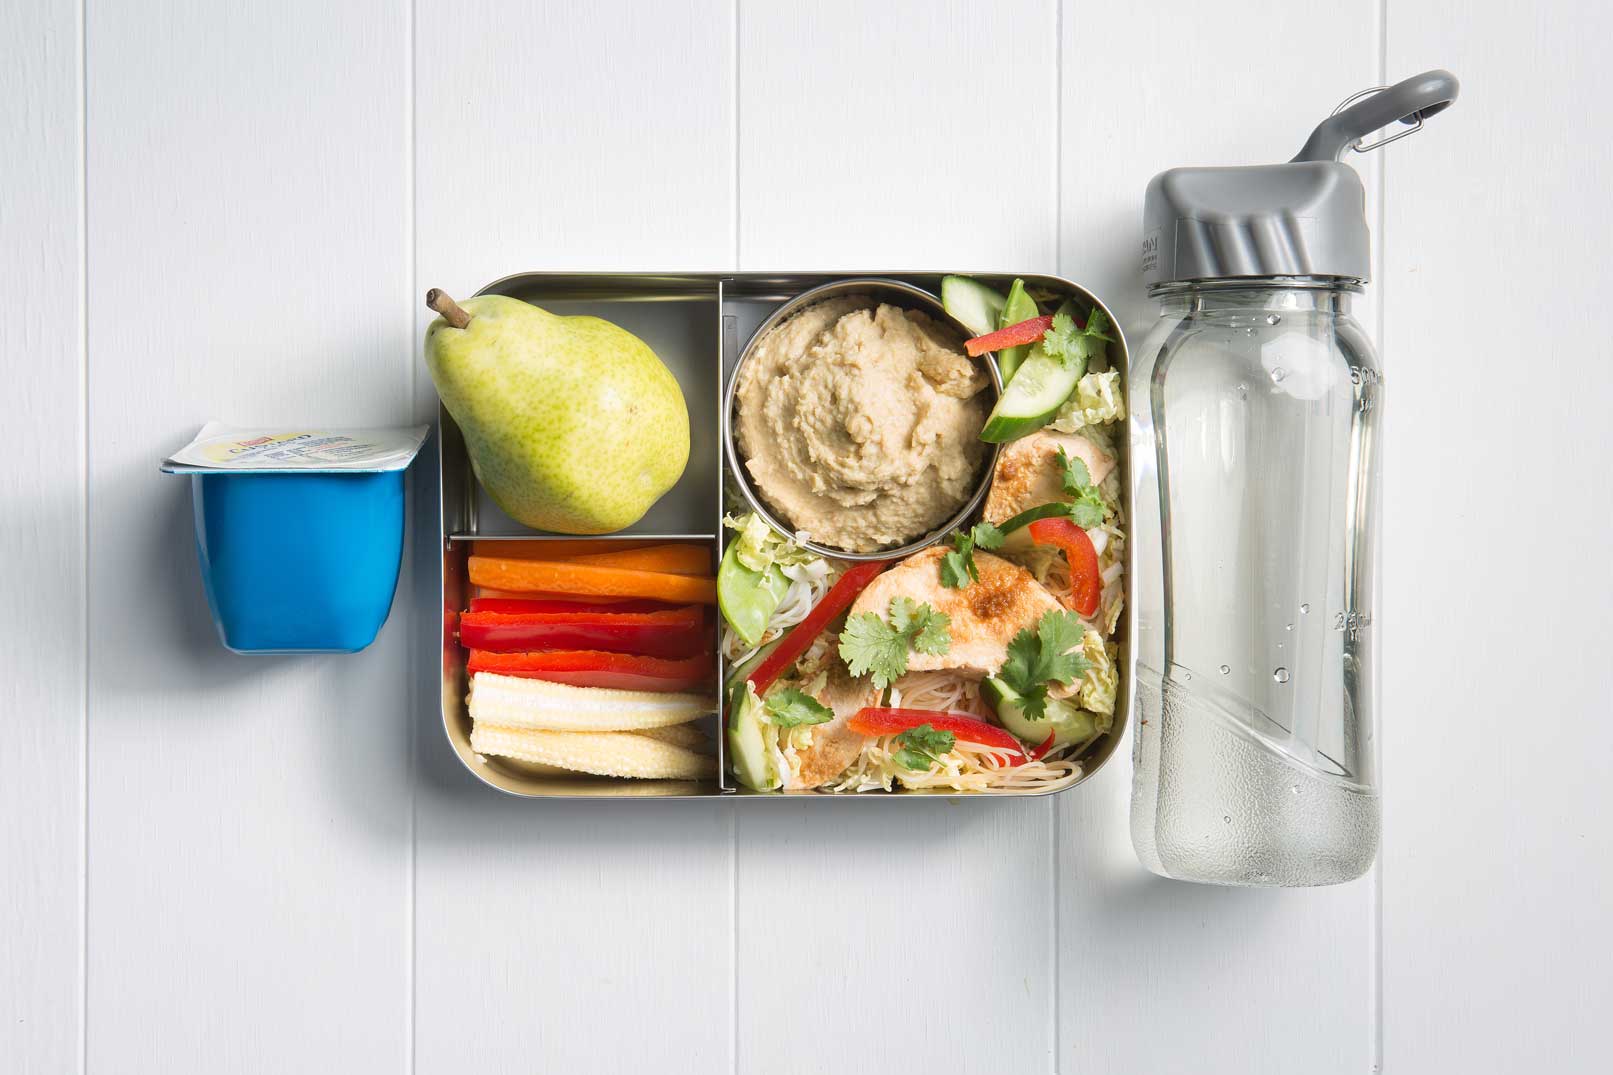 Image of a packed lunch box with soy and ginger chicken noodle salad, vegie sticks with hummus, green pear and a custard tub and bottle of water on the side